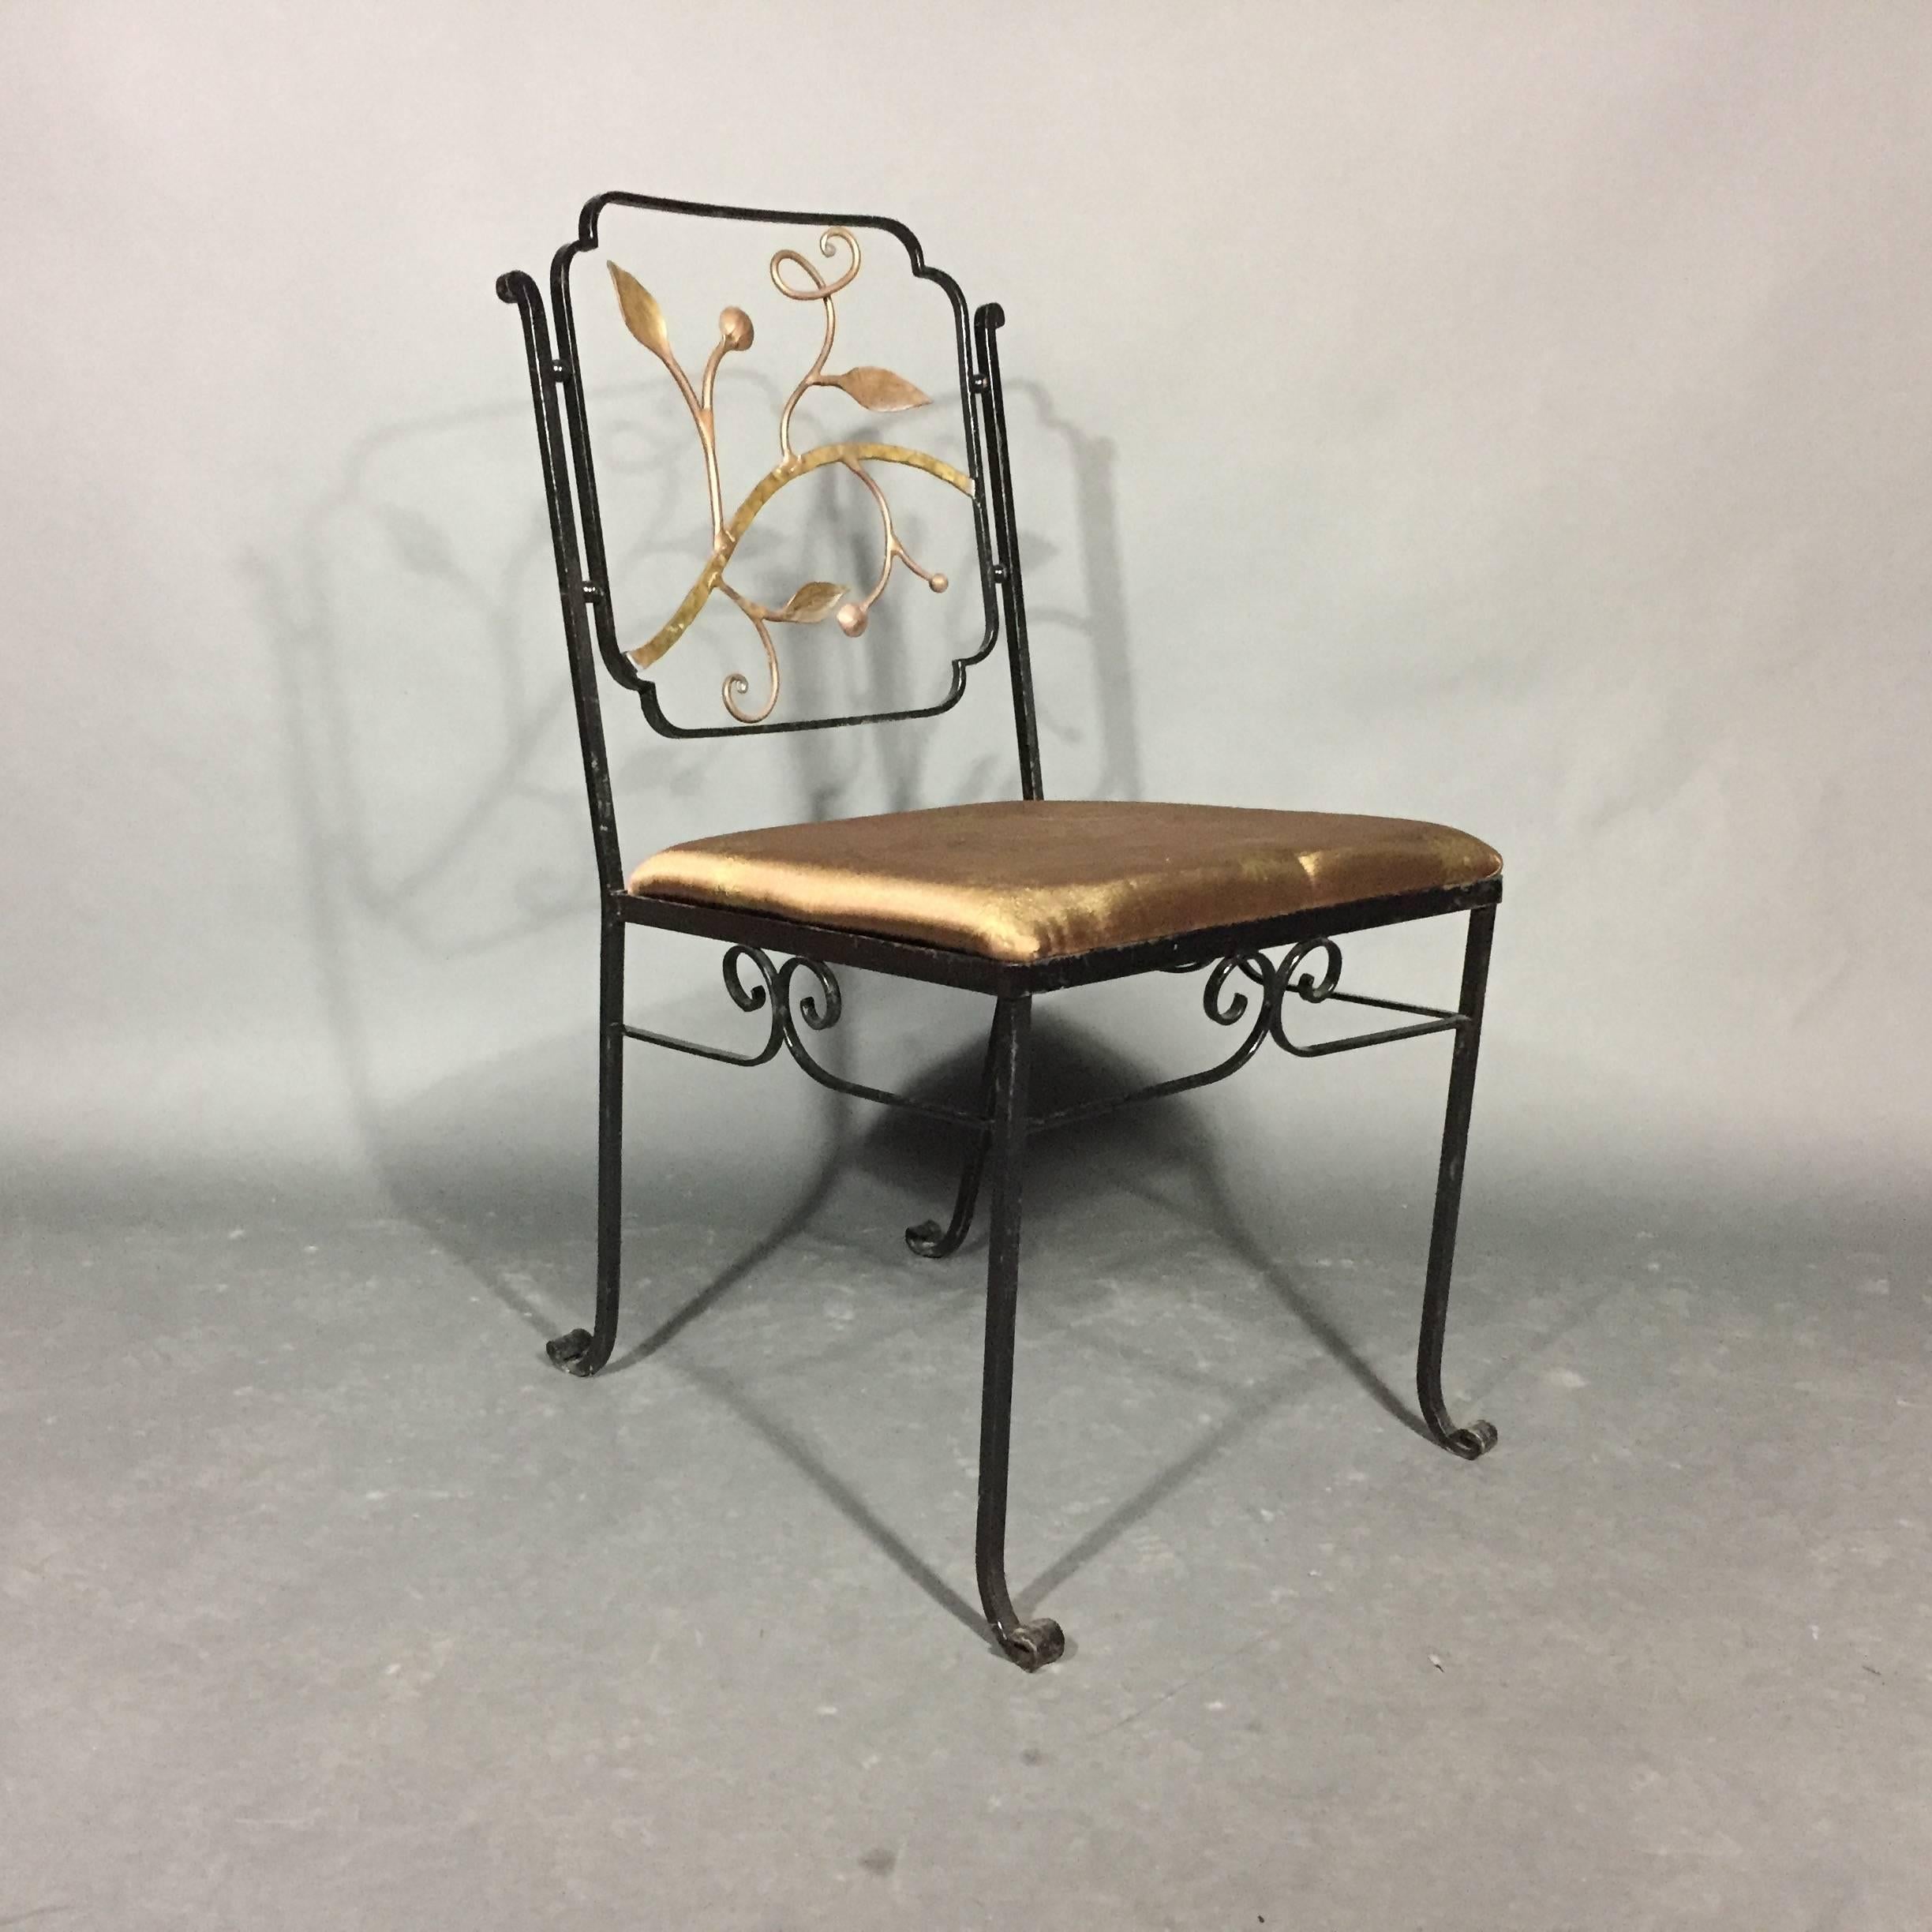 Set of four exceptional quality Art Deco era iron garden chairs with handcrafted bronze vine and leaf seat backs. Wonderful scroll work to sides and feet. This set is 1920s or early 1930s in excellent condition, possibly Salterini but more likely be